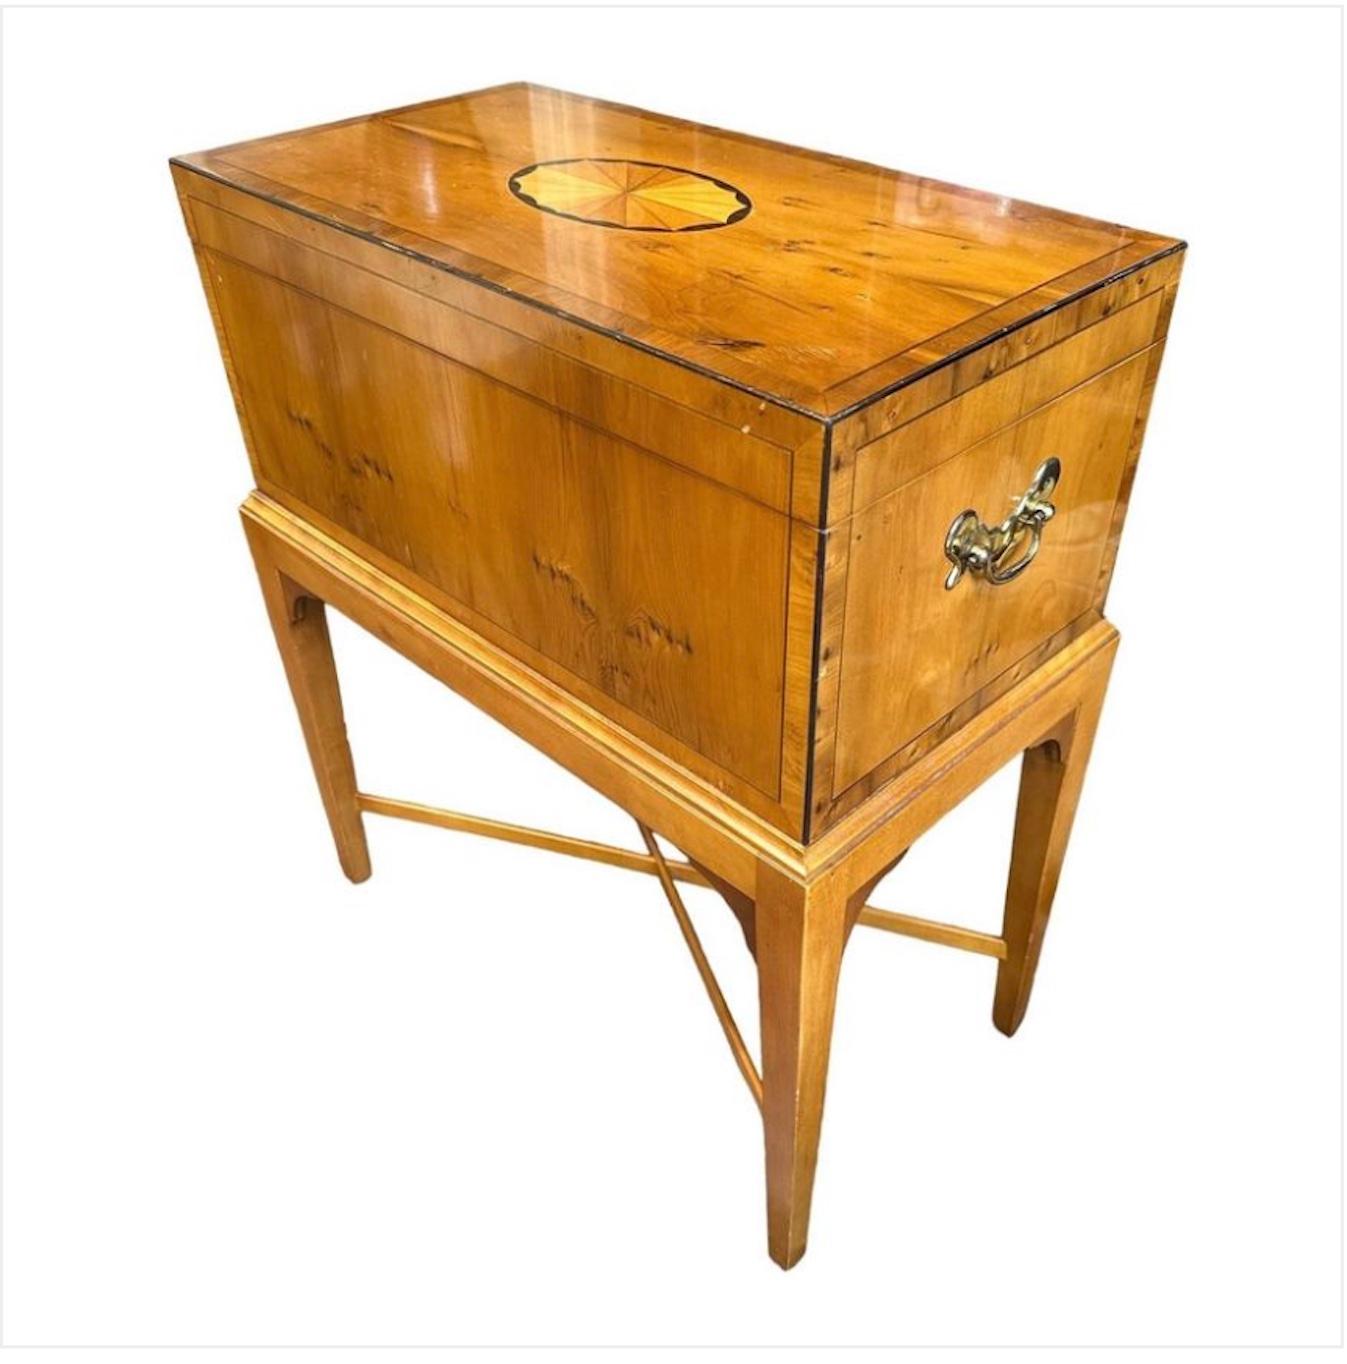 Baker Furniture Side Table Or Humidor. Satinwood With Inlay. 3